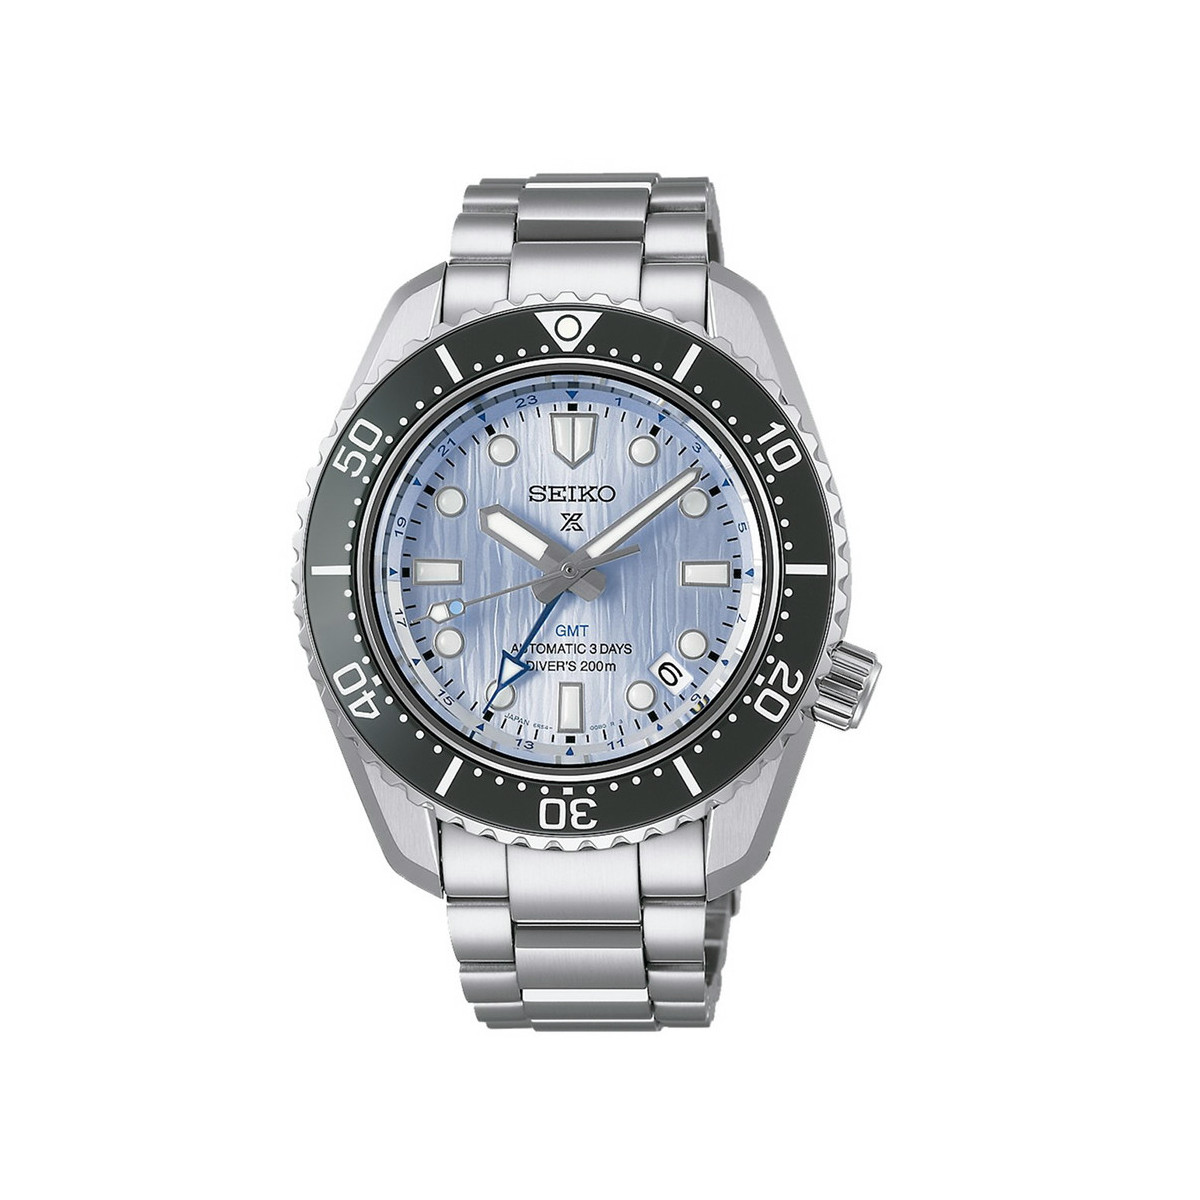 SEIKO PROSPEX SAVE THE OCEAN LIMITED EDITION